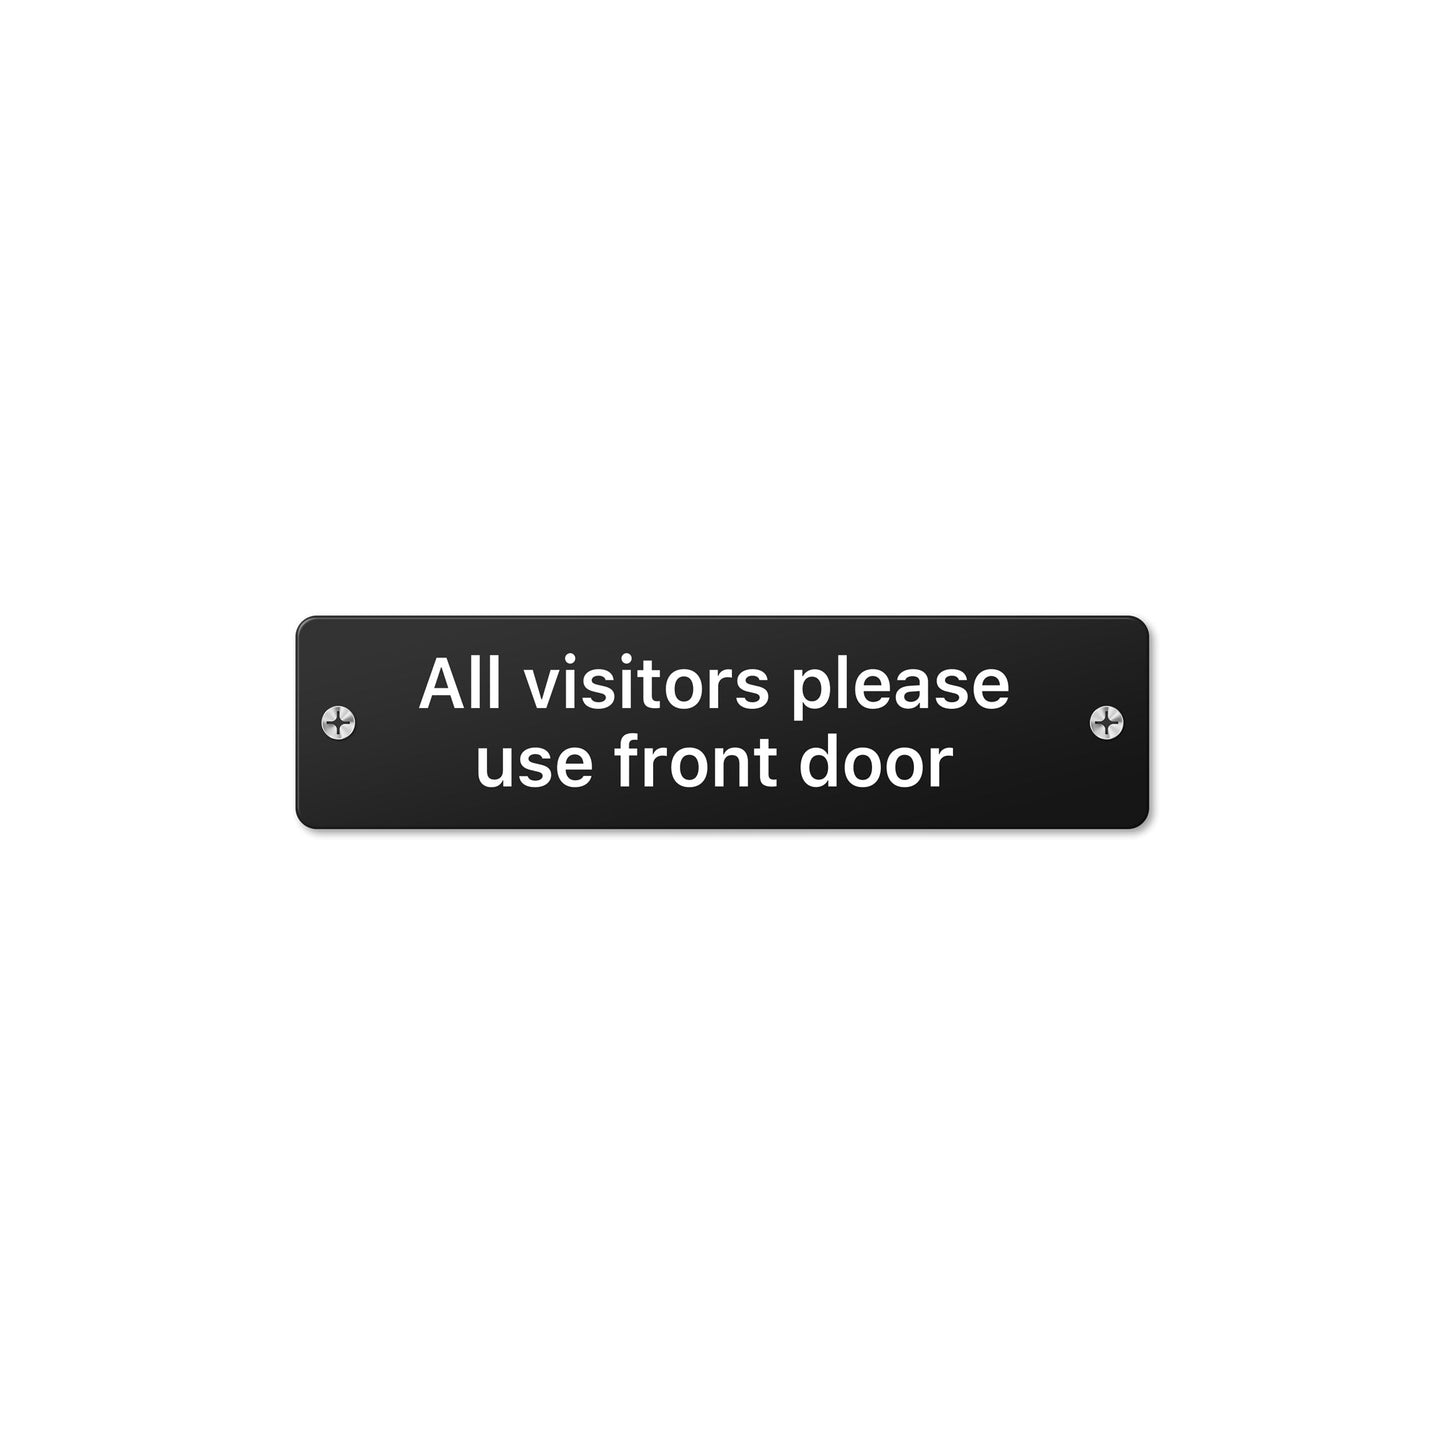 All visitors please use front door